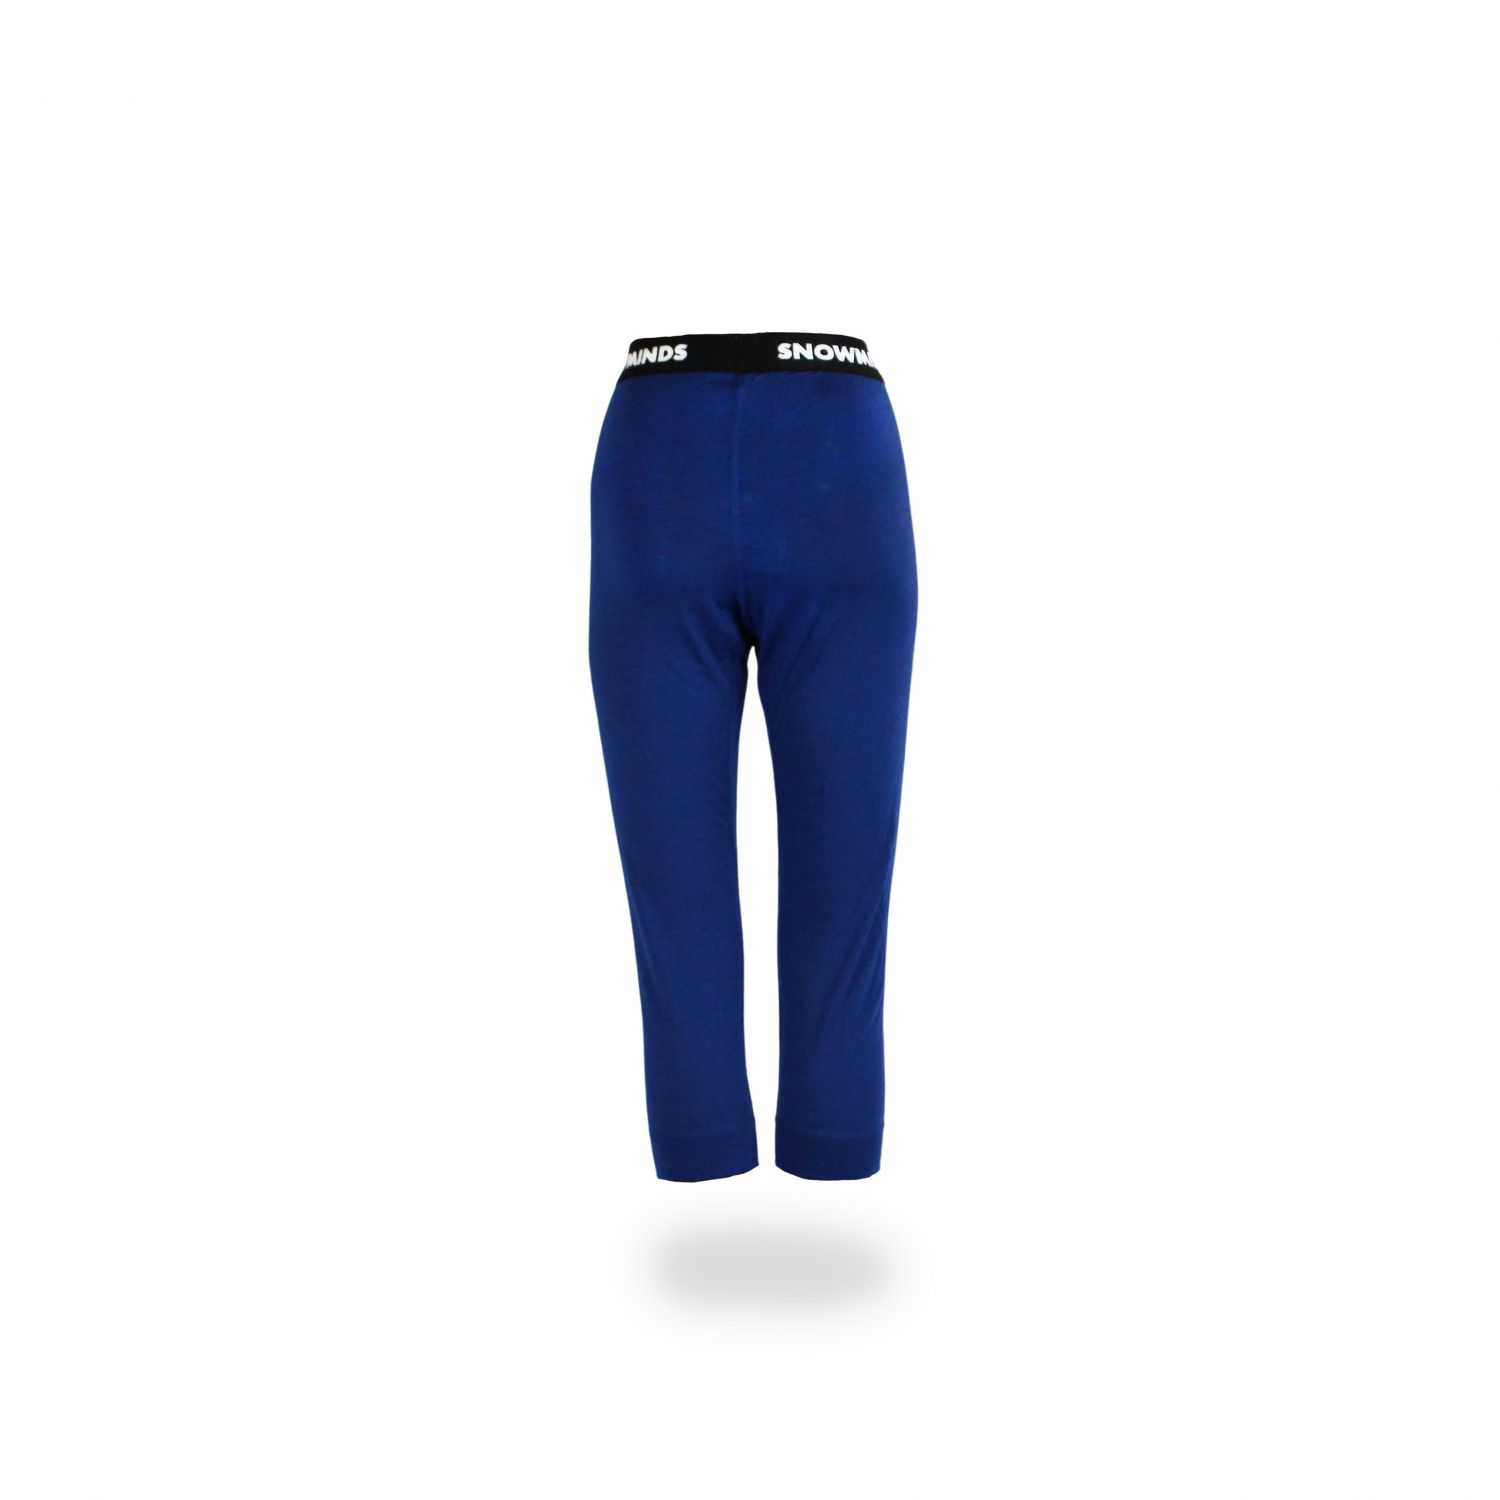 The Marvellous Merino Wool Pants, Snowminds, dame, blue bell weather